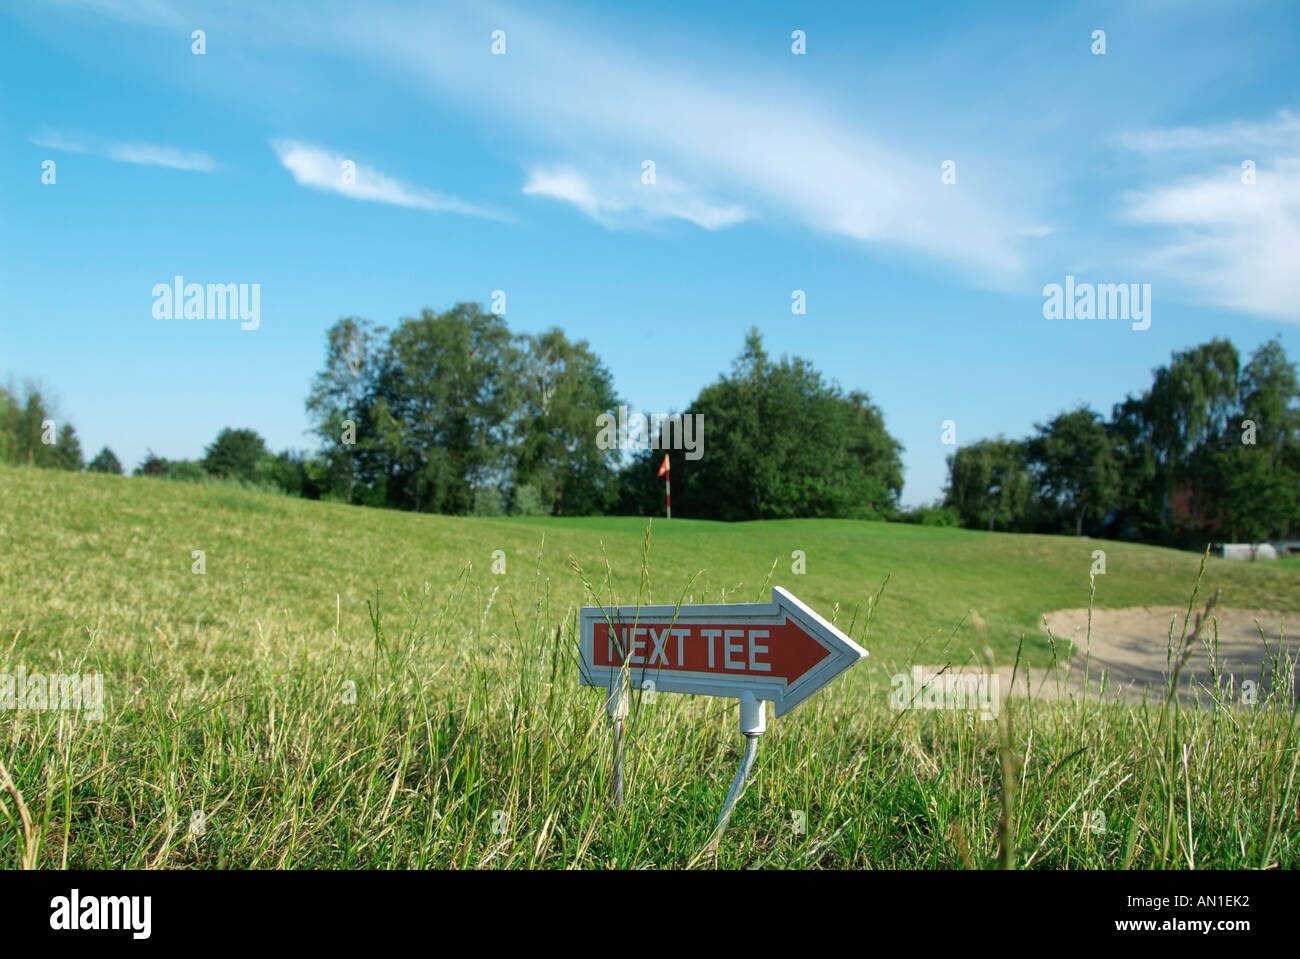 Golf Golfing Golfsport, detail of sign on golf course Stock Photo